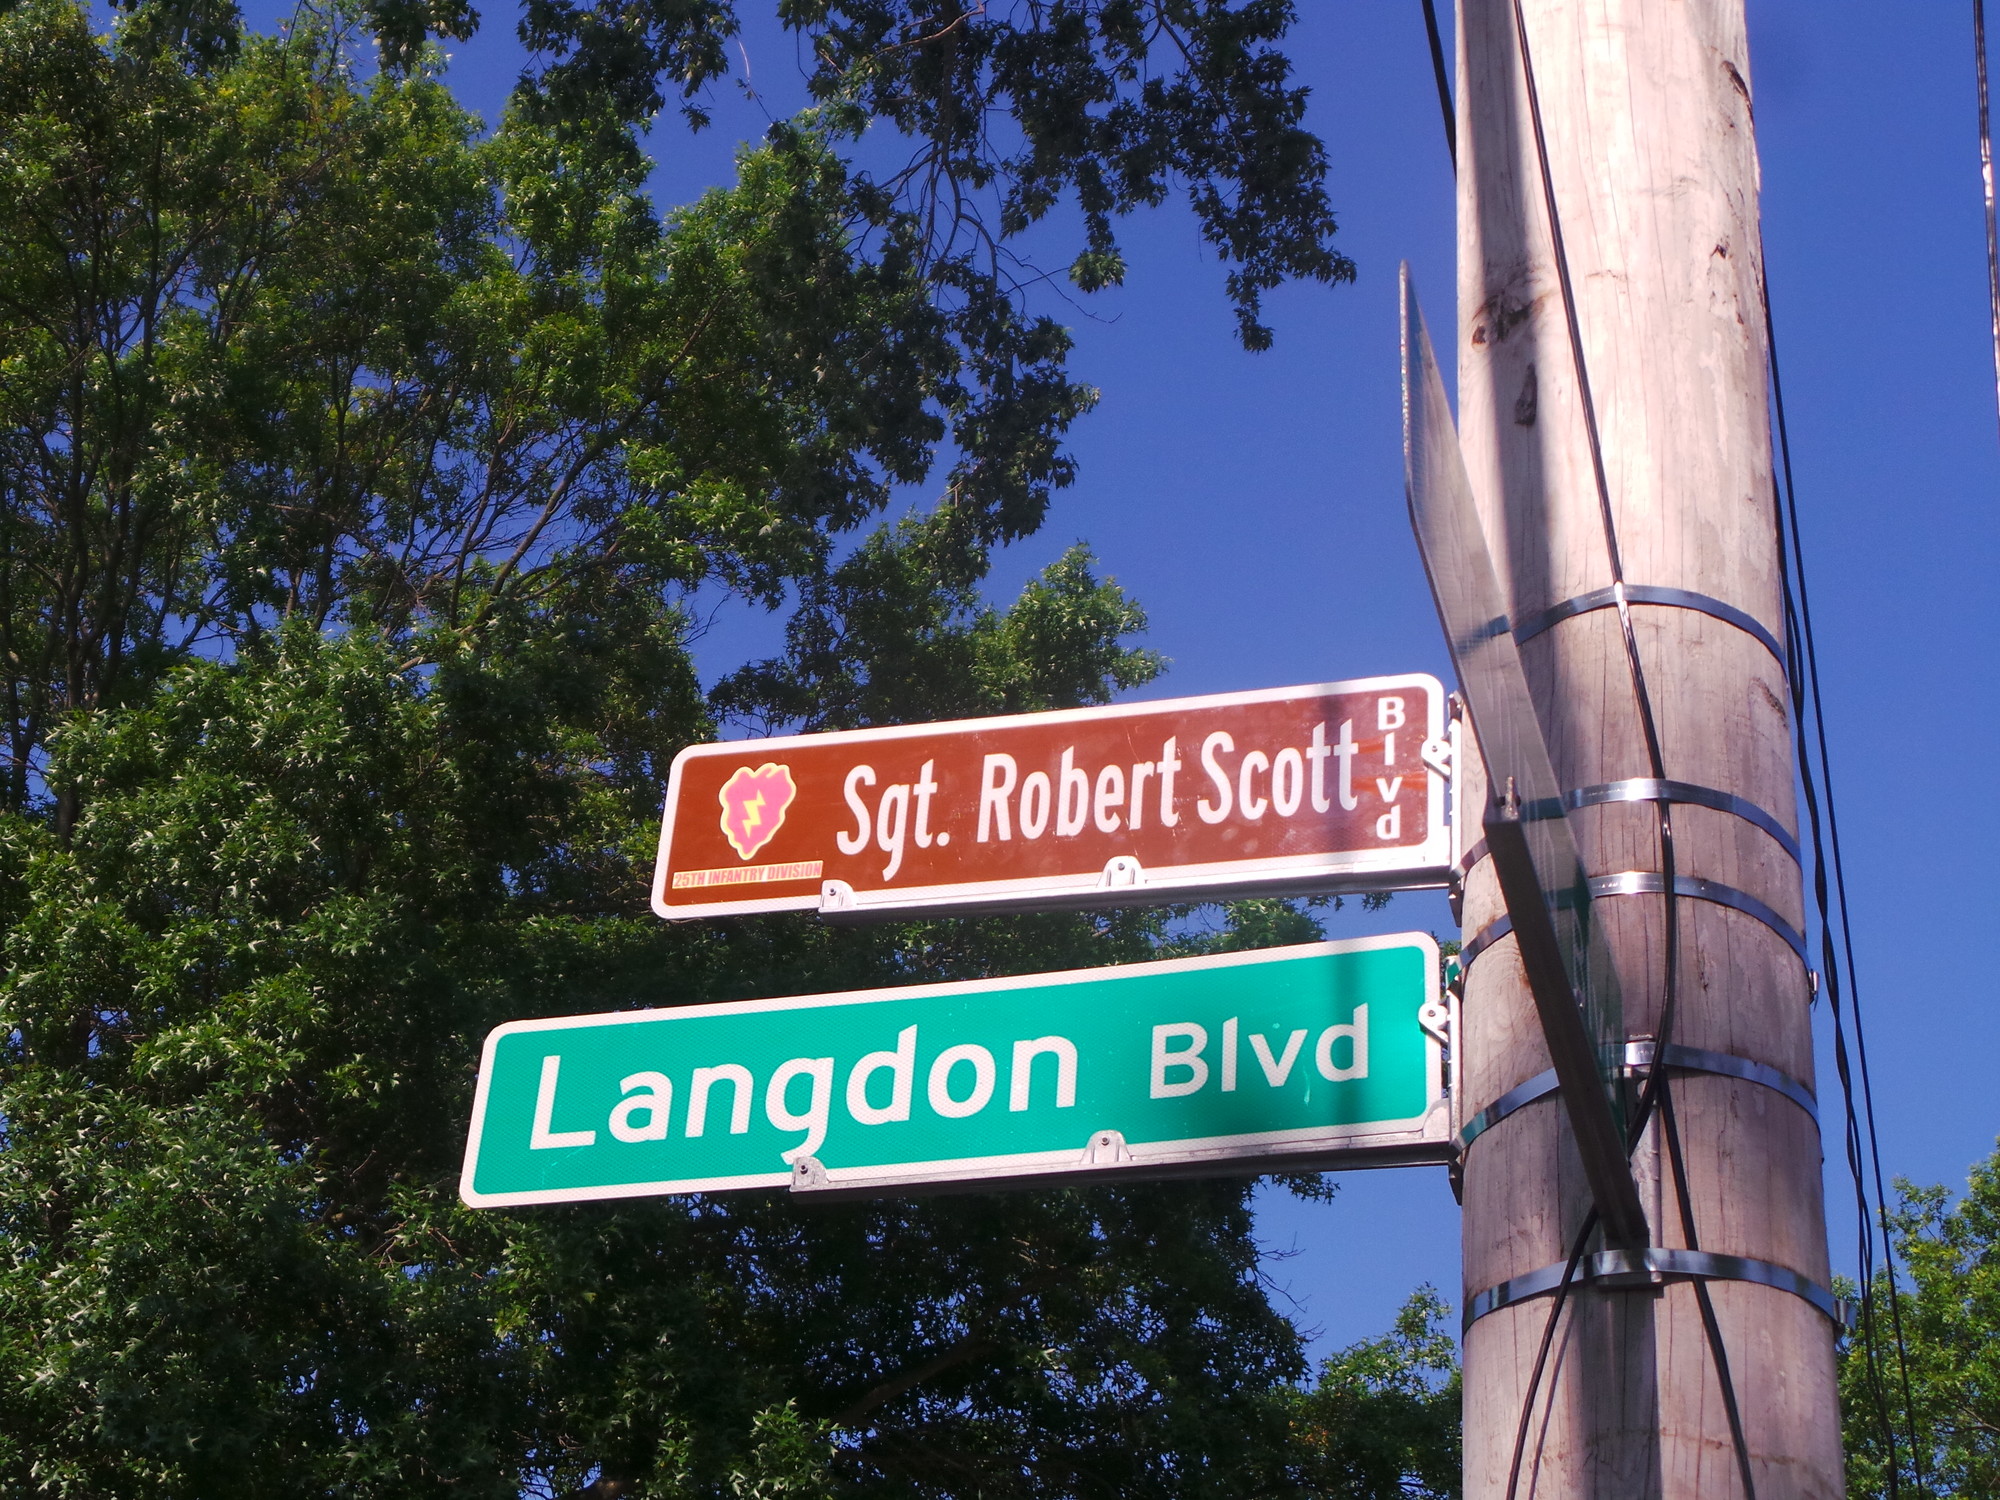 Langdon st. in Rockville Centre/Lakeview was dedicated in Scott’s honor.